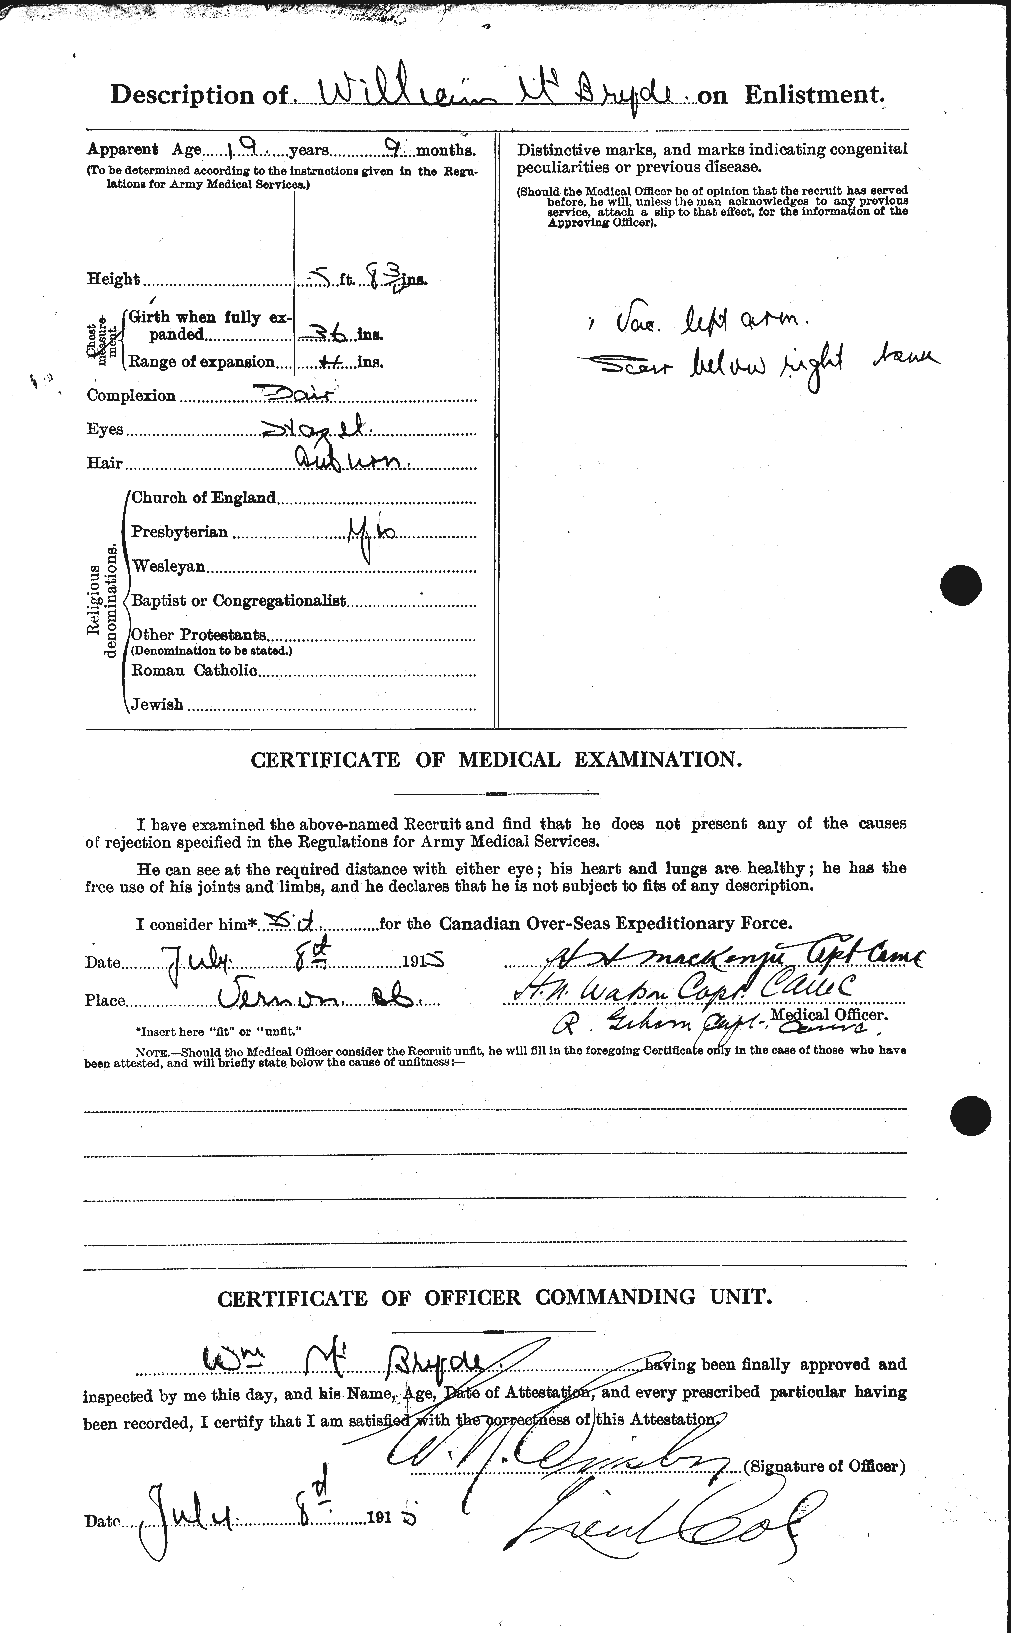 Personnel Records of the First World War - CEF 131333b